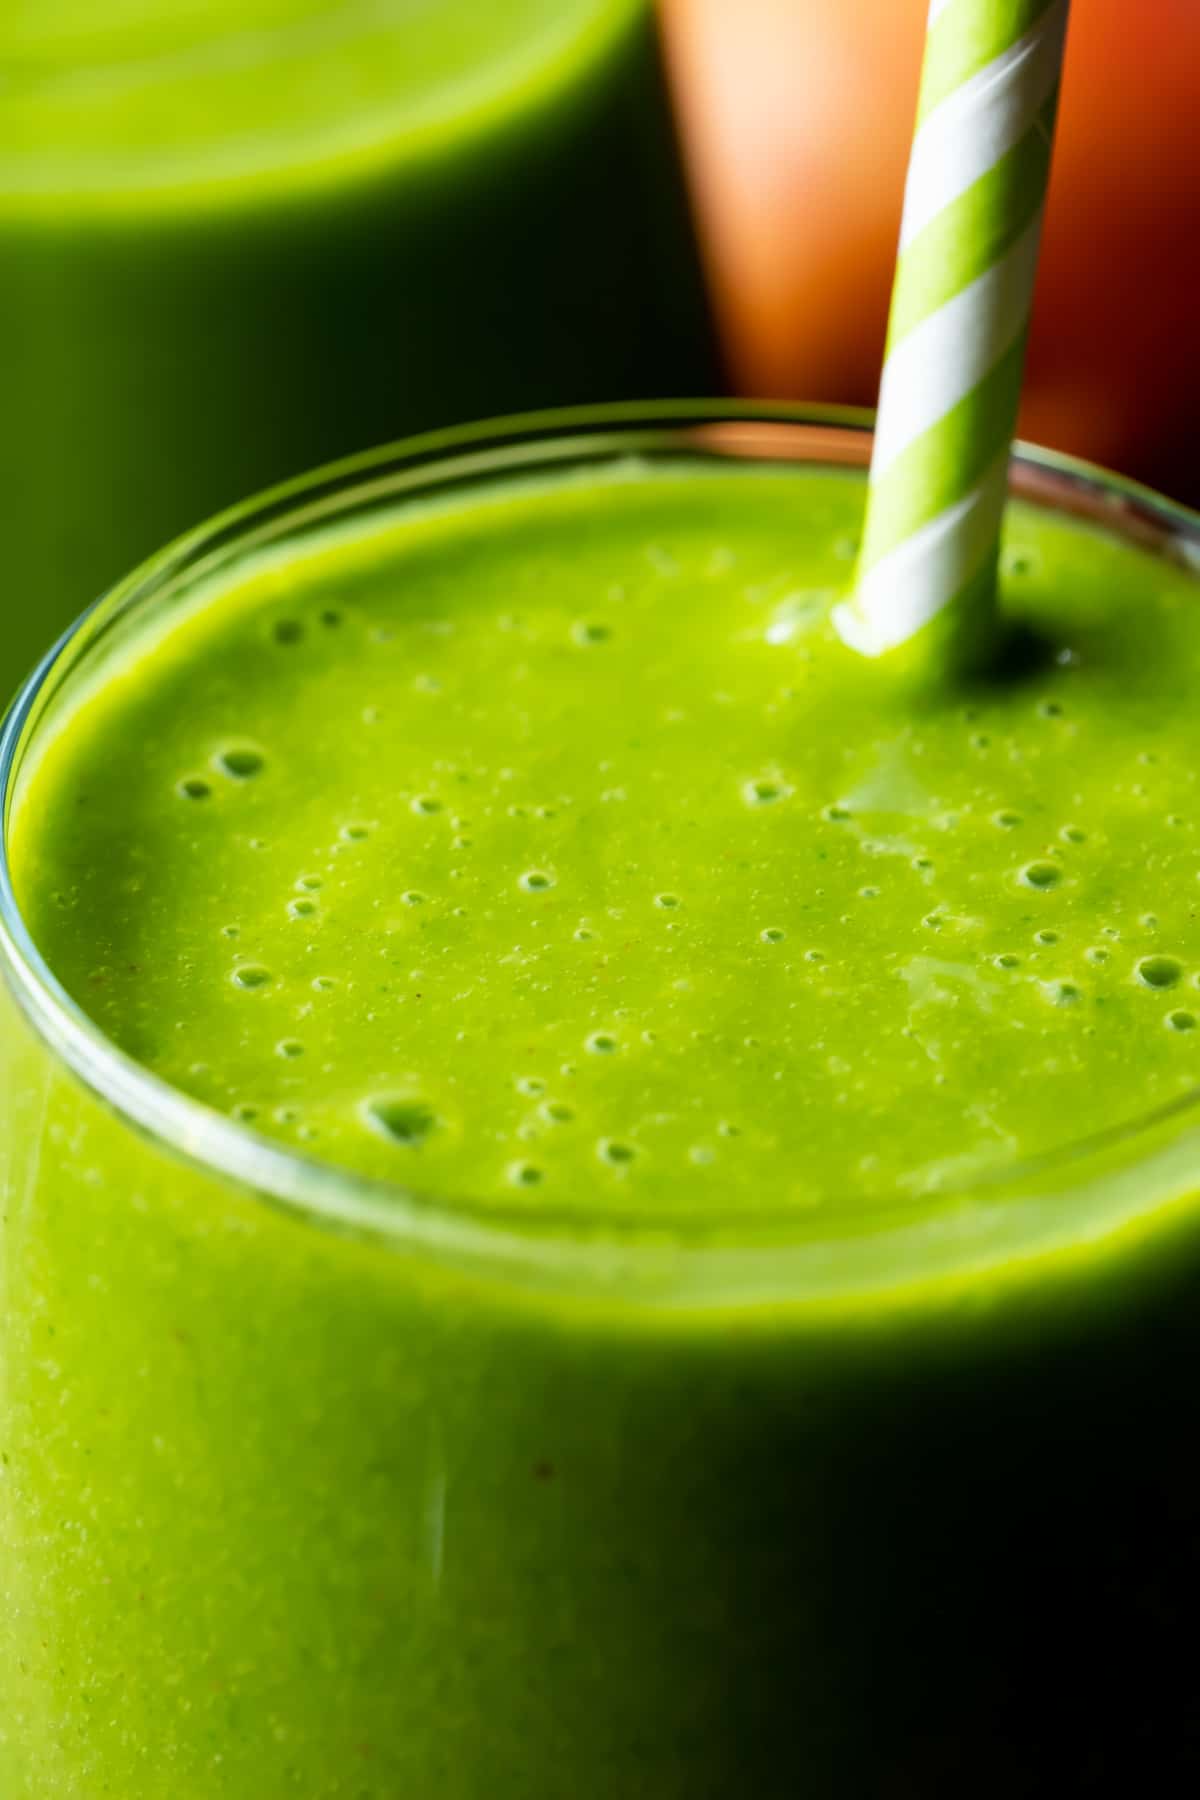 Green smoothie in a glass with a straw.